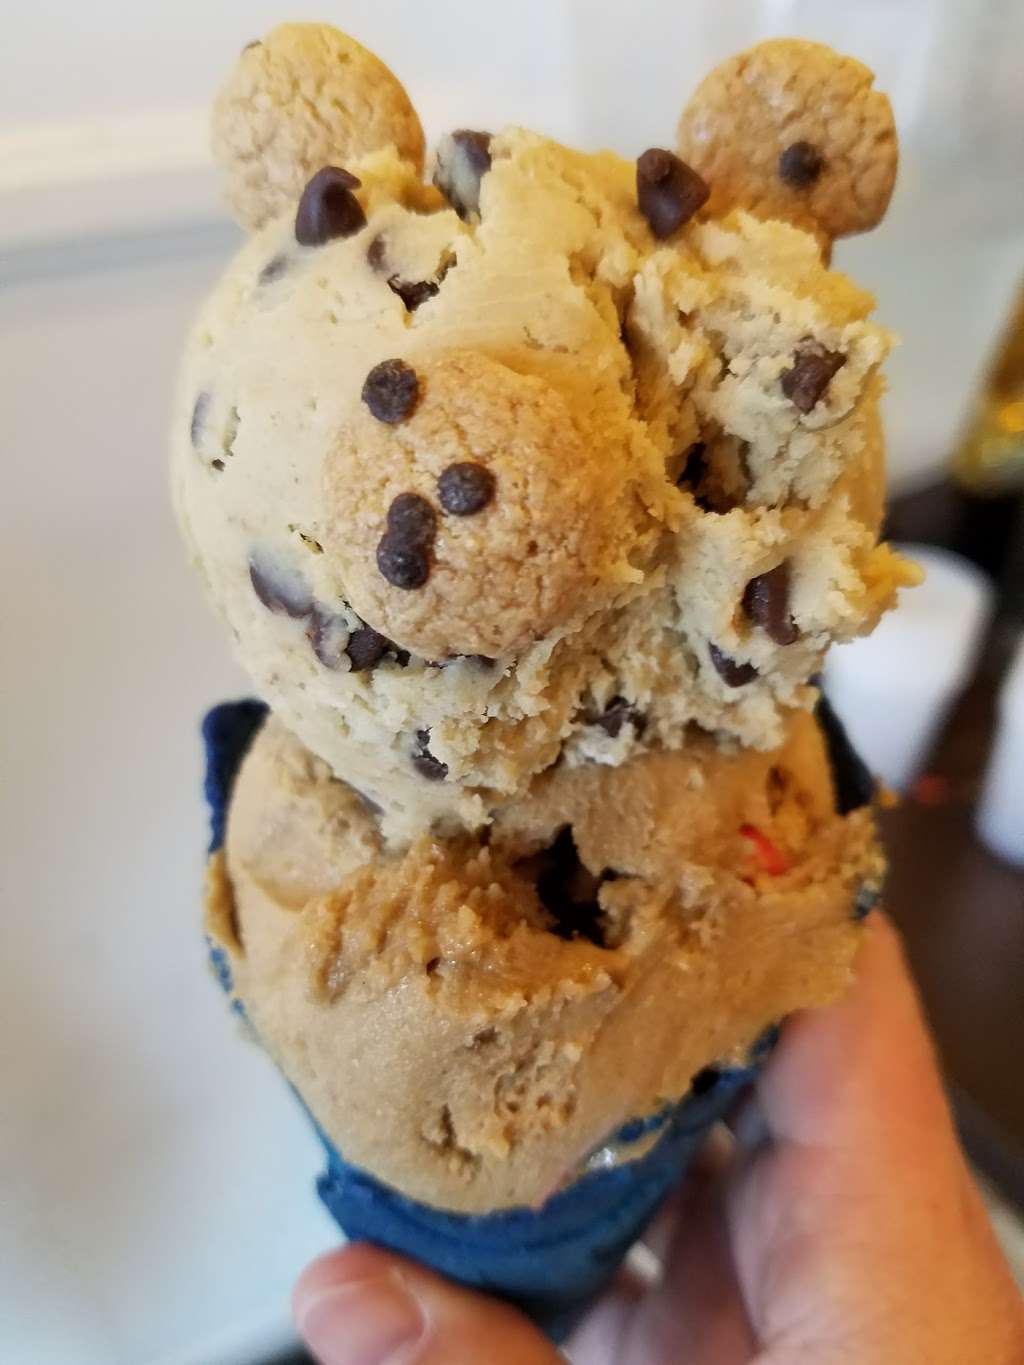 California Cookie Dough | 18854 Brookhurst St, Fountain Valley, CA 92708, USA | Phone: (714) 592-7644